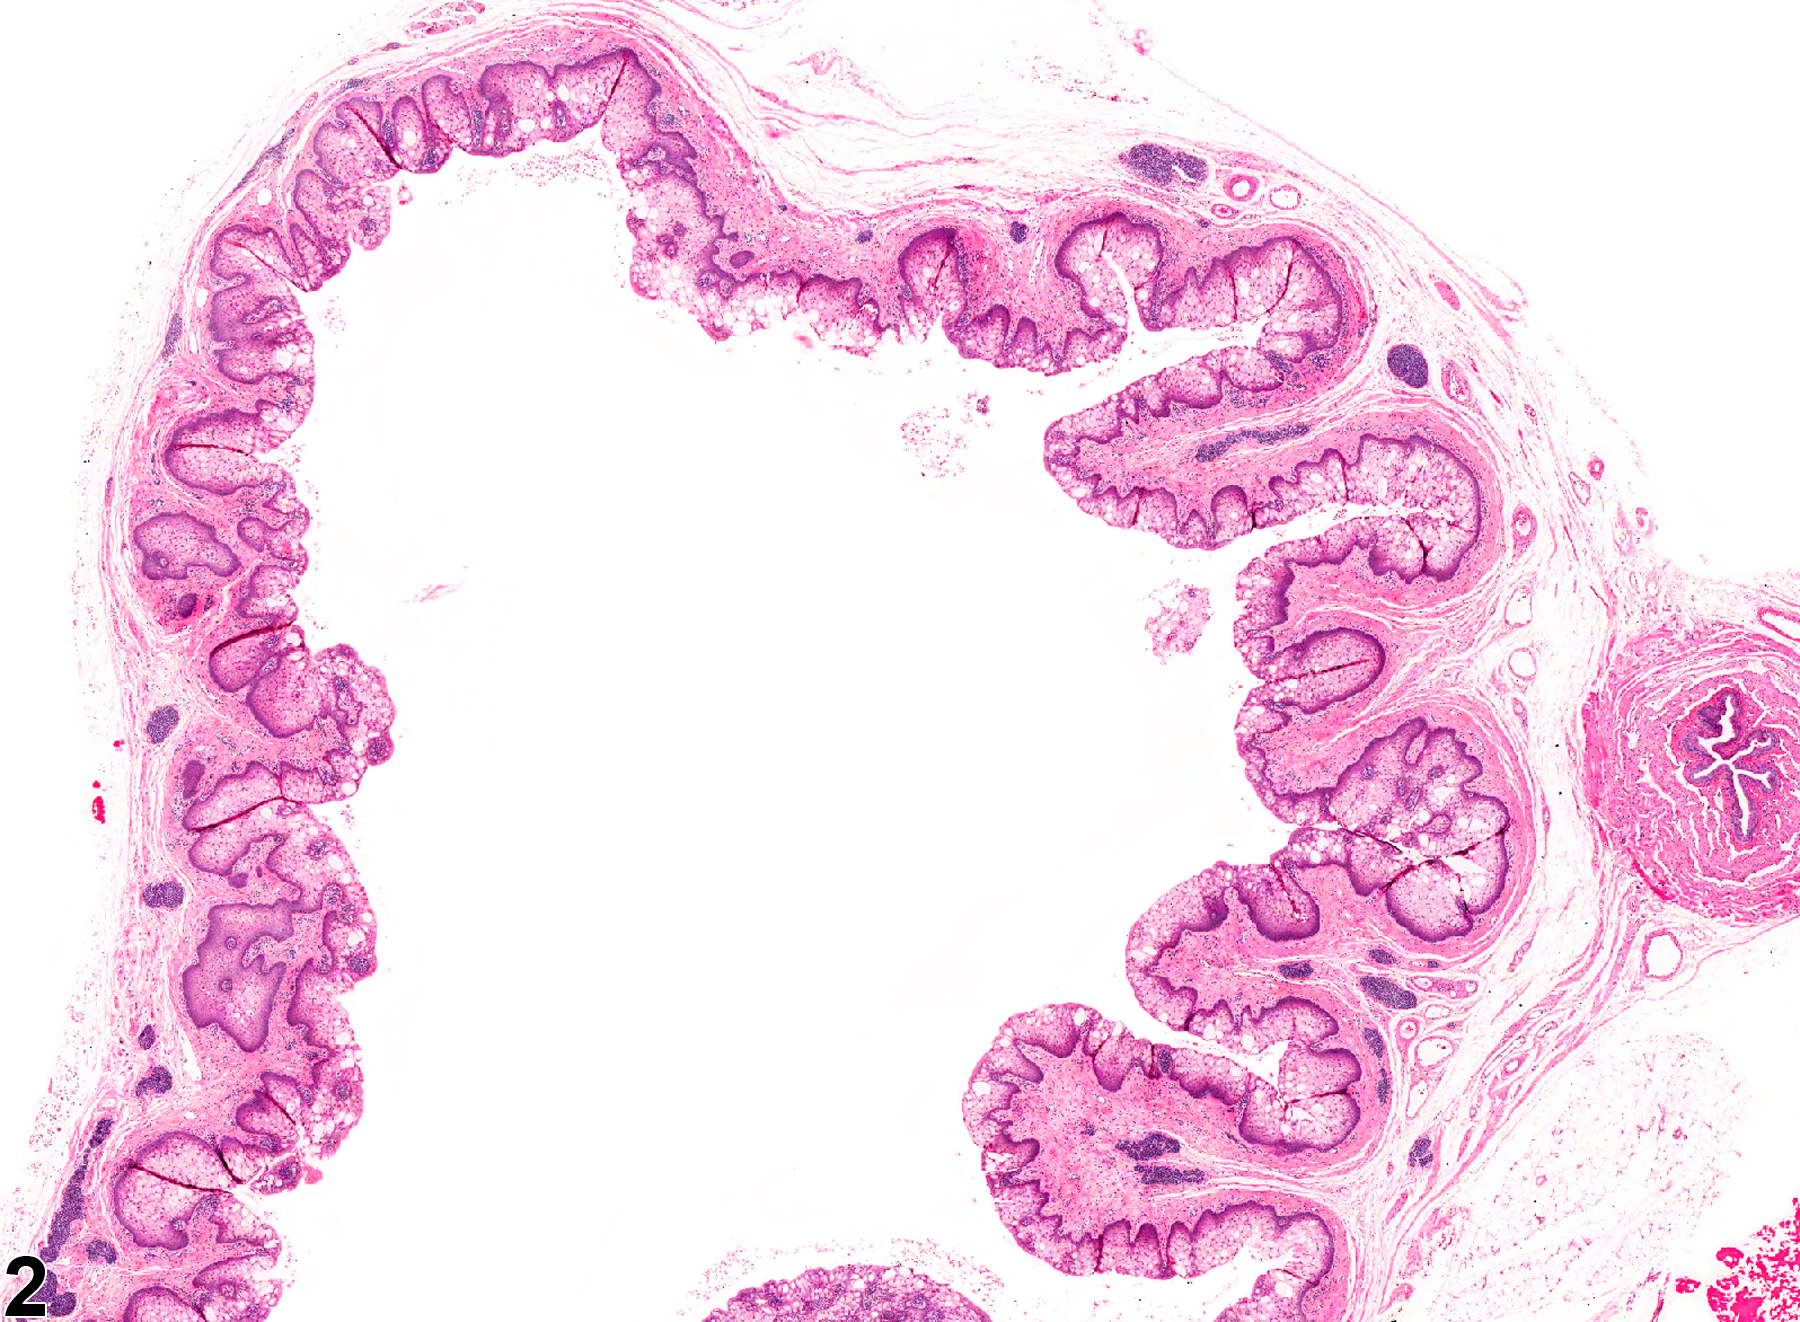 Image of dilation in the vagina from a female F344/N rat in a chronic study